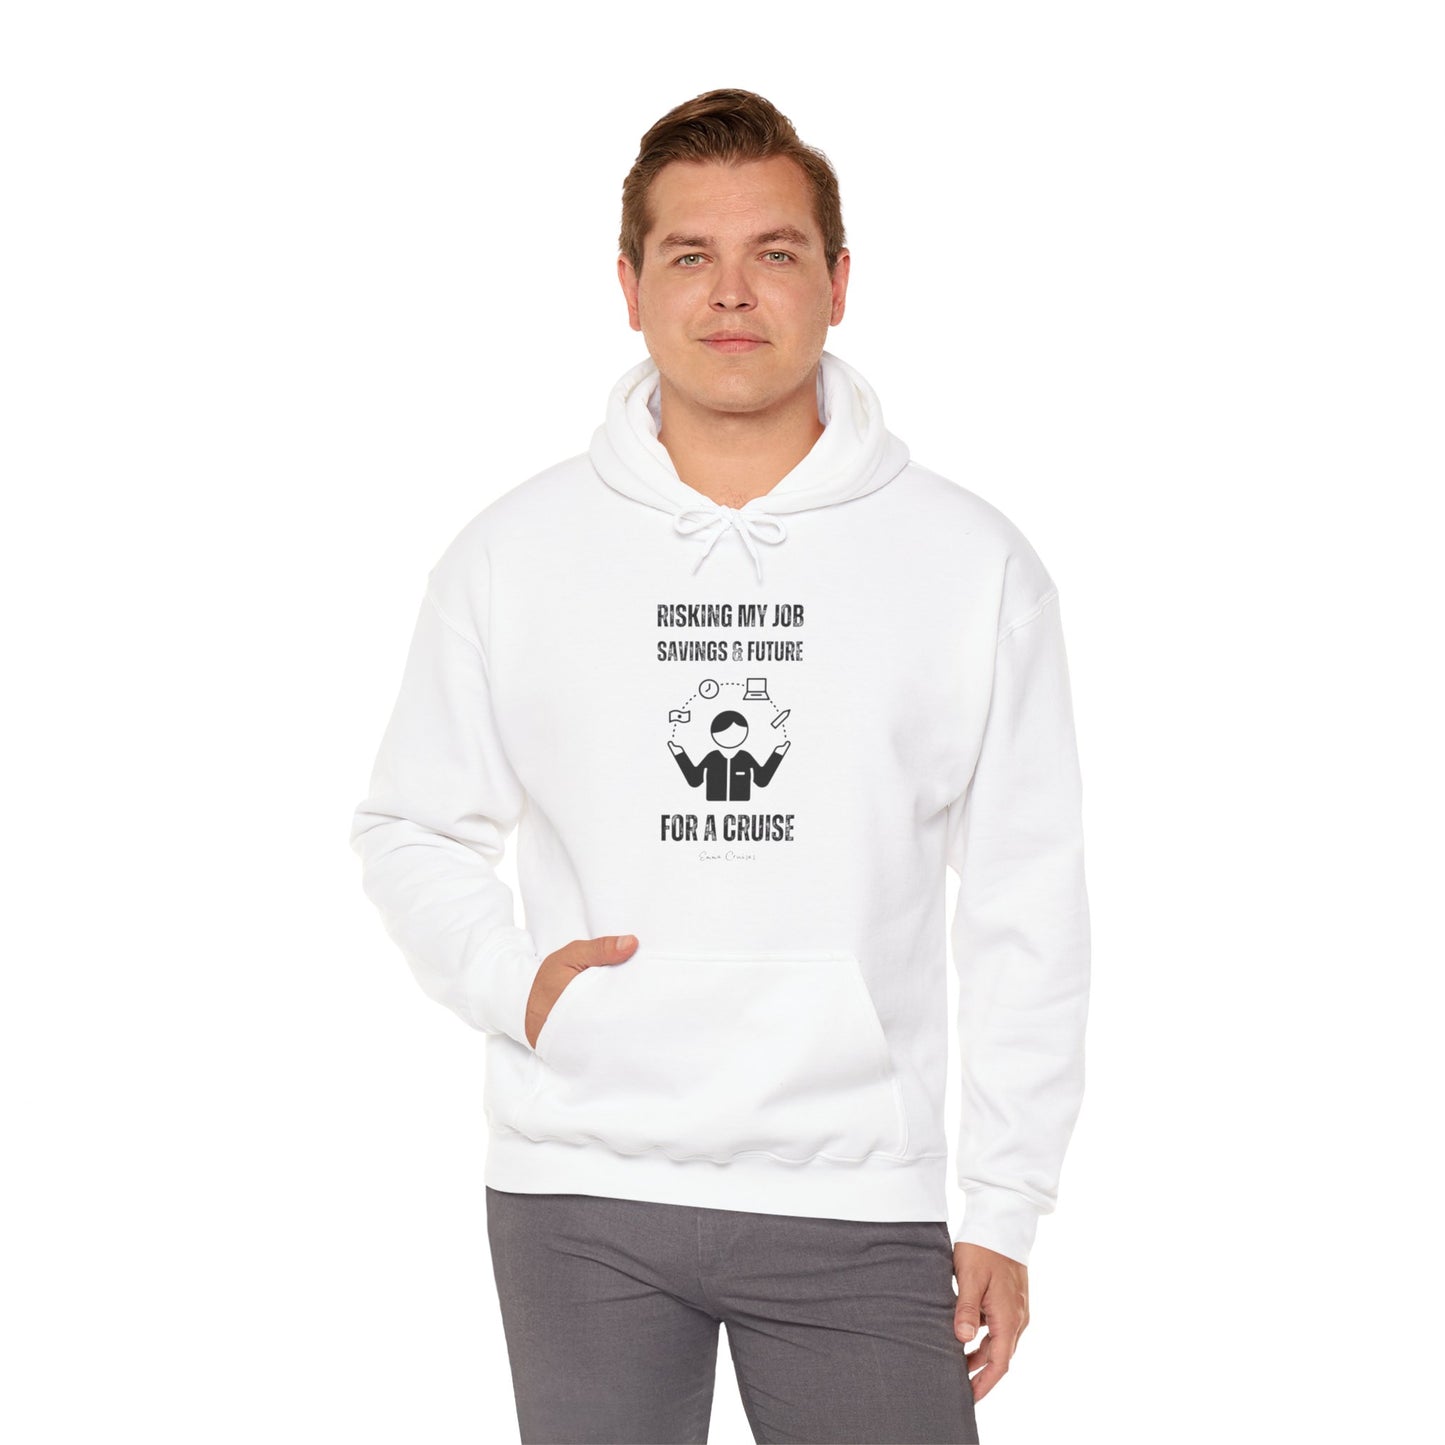 Risking Everything for a Cruise - UNISEX Hoodie